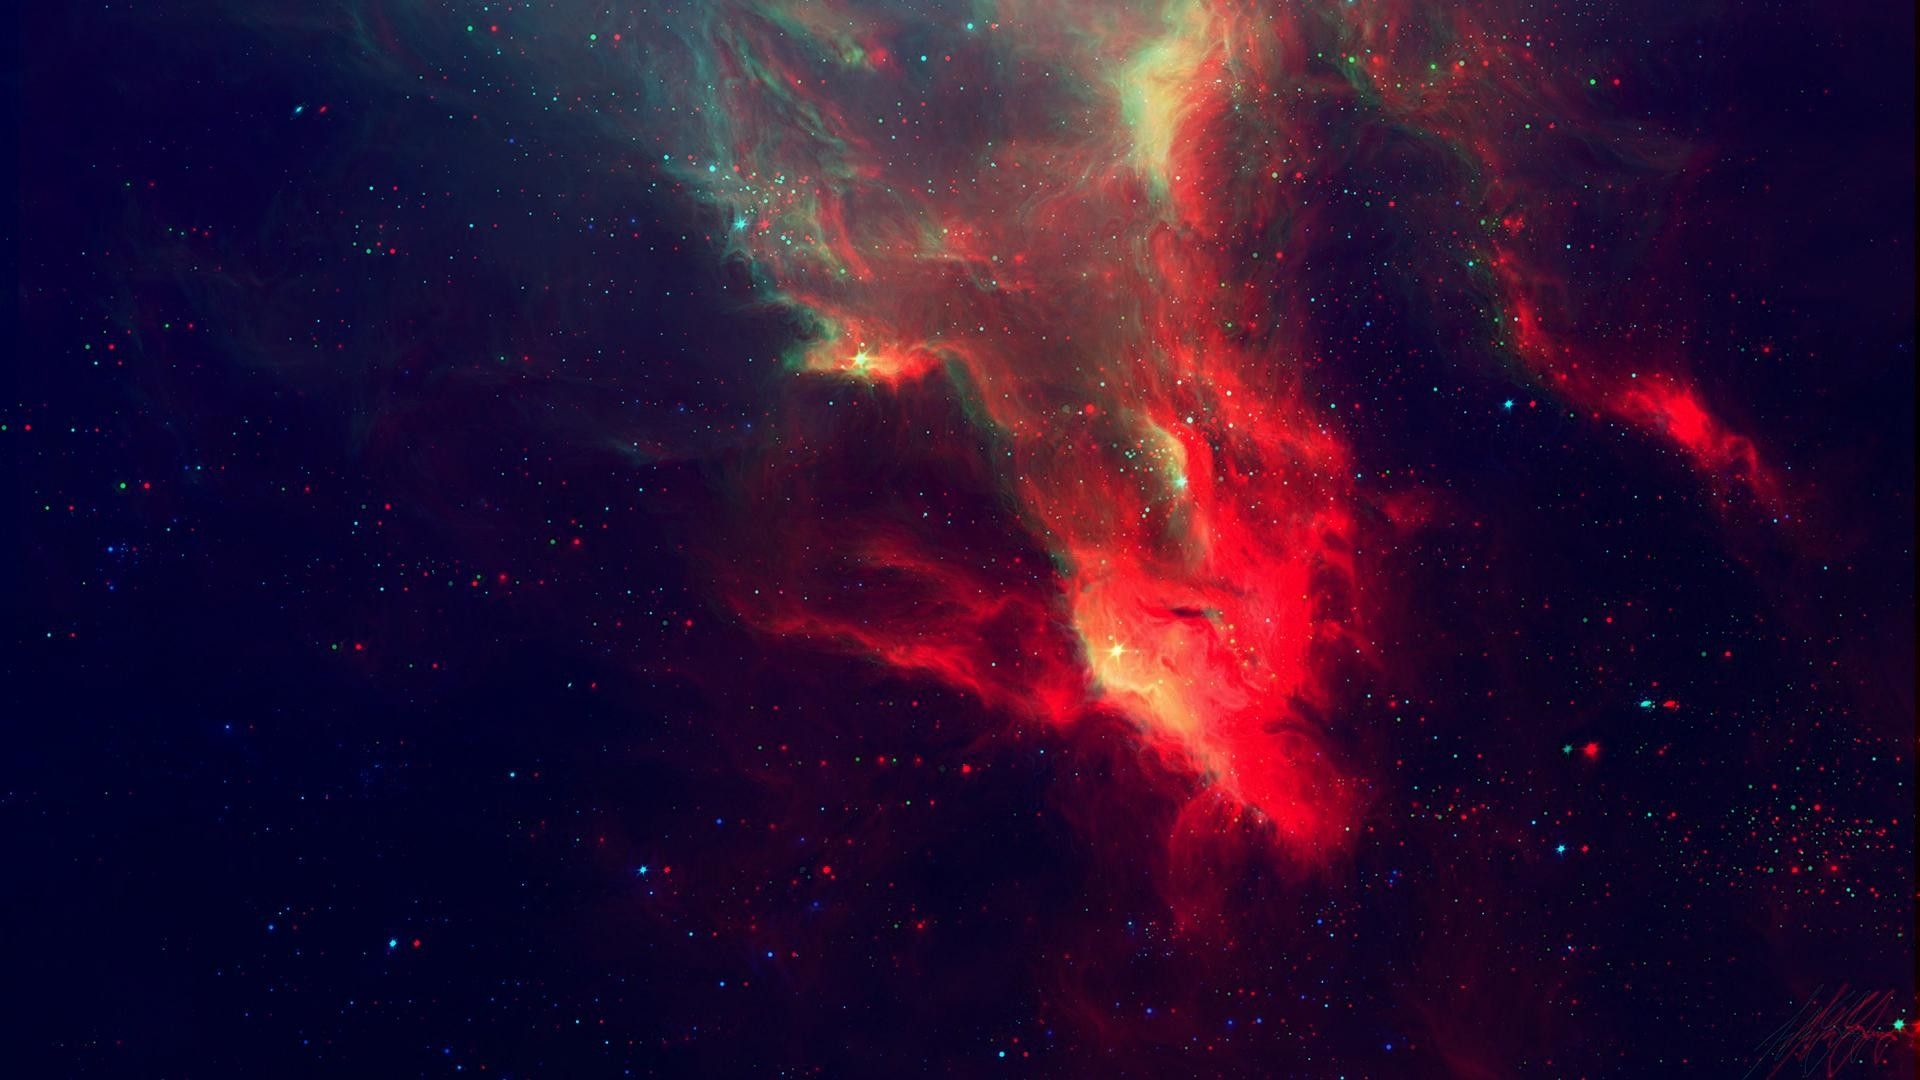 1920x1080 wallpaper of the space, nebula, stars, color, red, blue, black, background, image, pictures - Indie